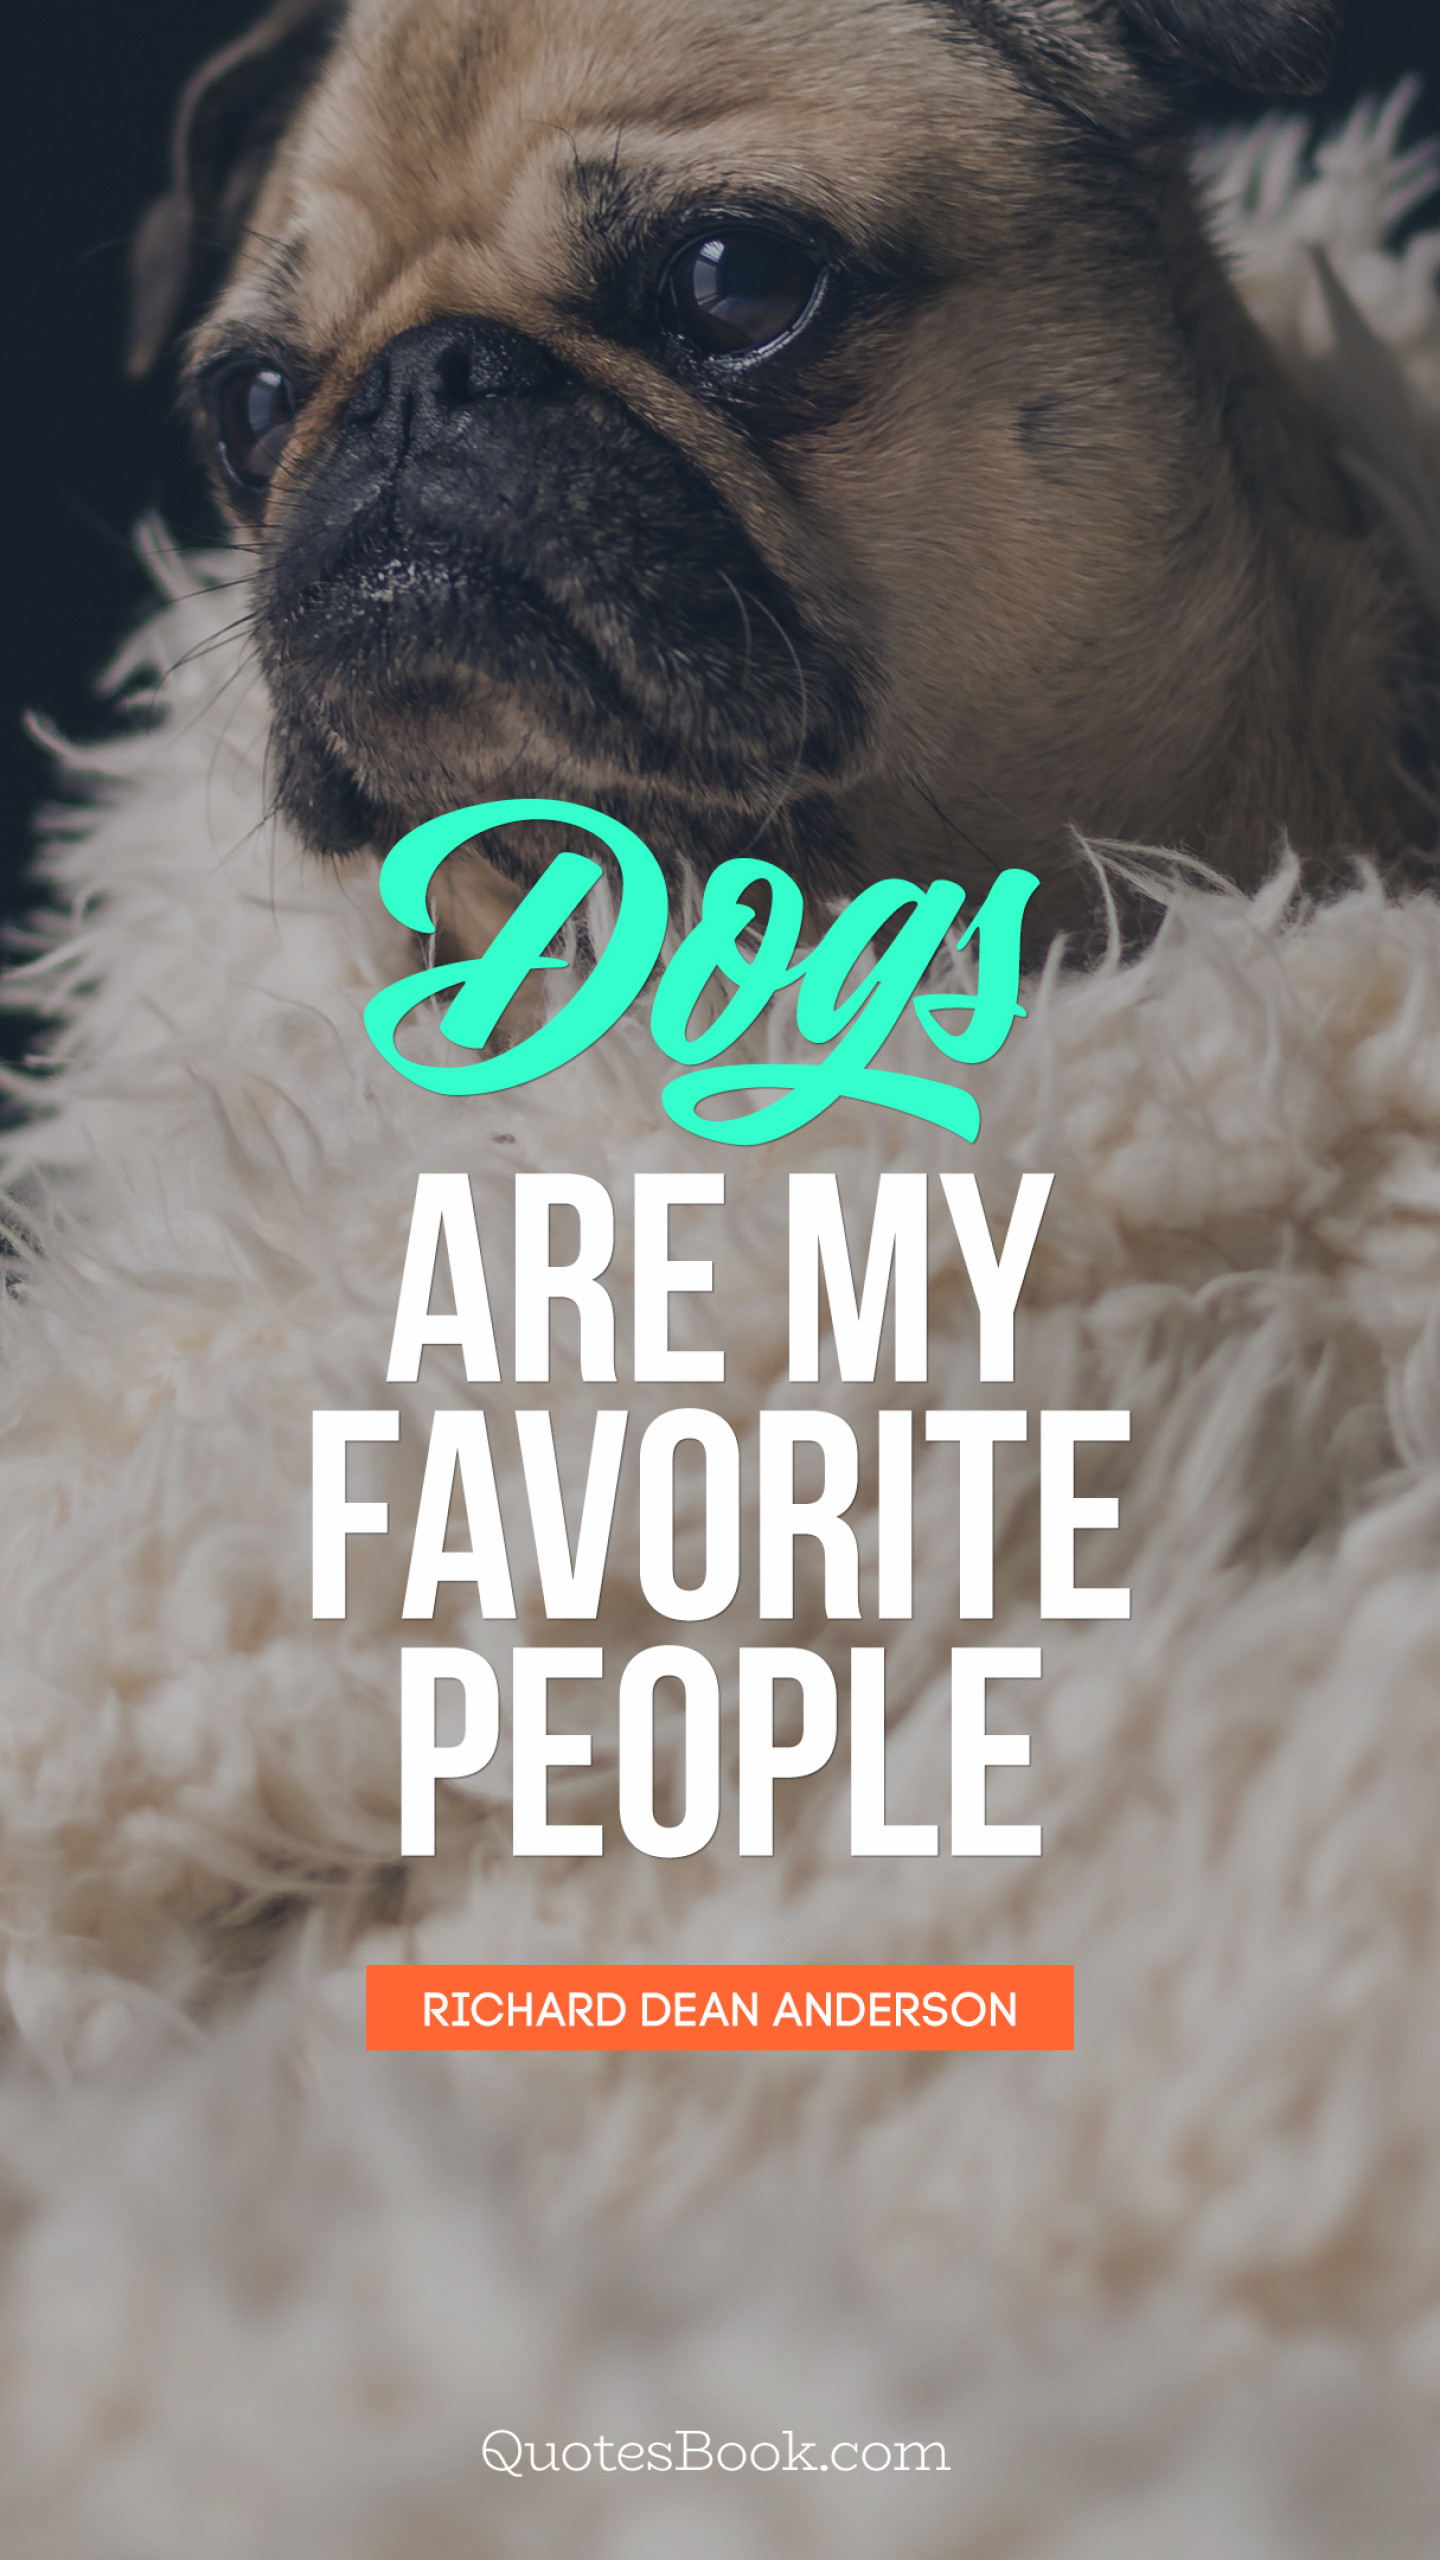 Dogs are my favorite people . - Quote by Richard Dean Anderson - QuotesBook